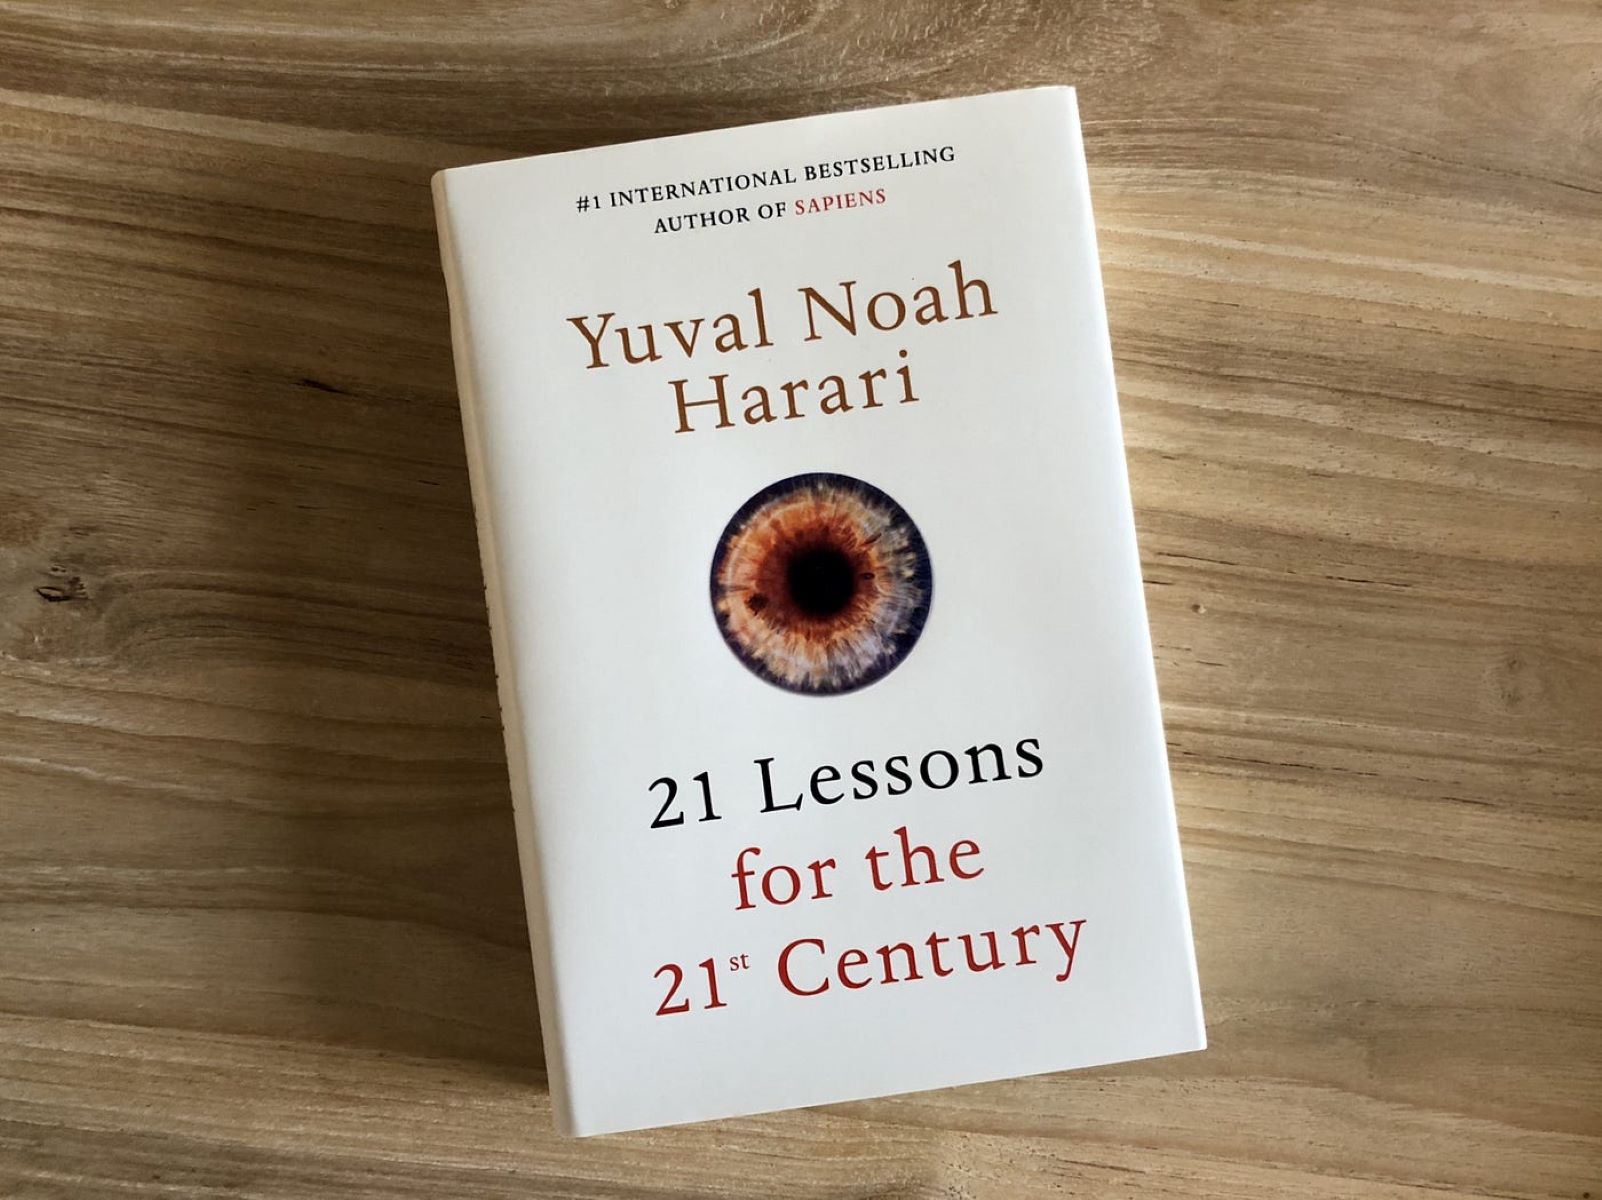 15-mind-blowing-facts-about-21-lessons-for-the-21st-century-yuval-noah-harari